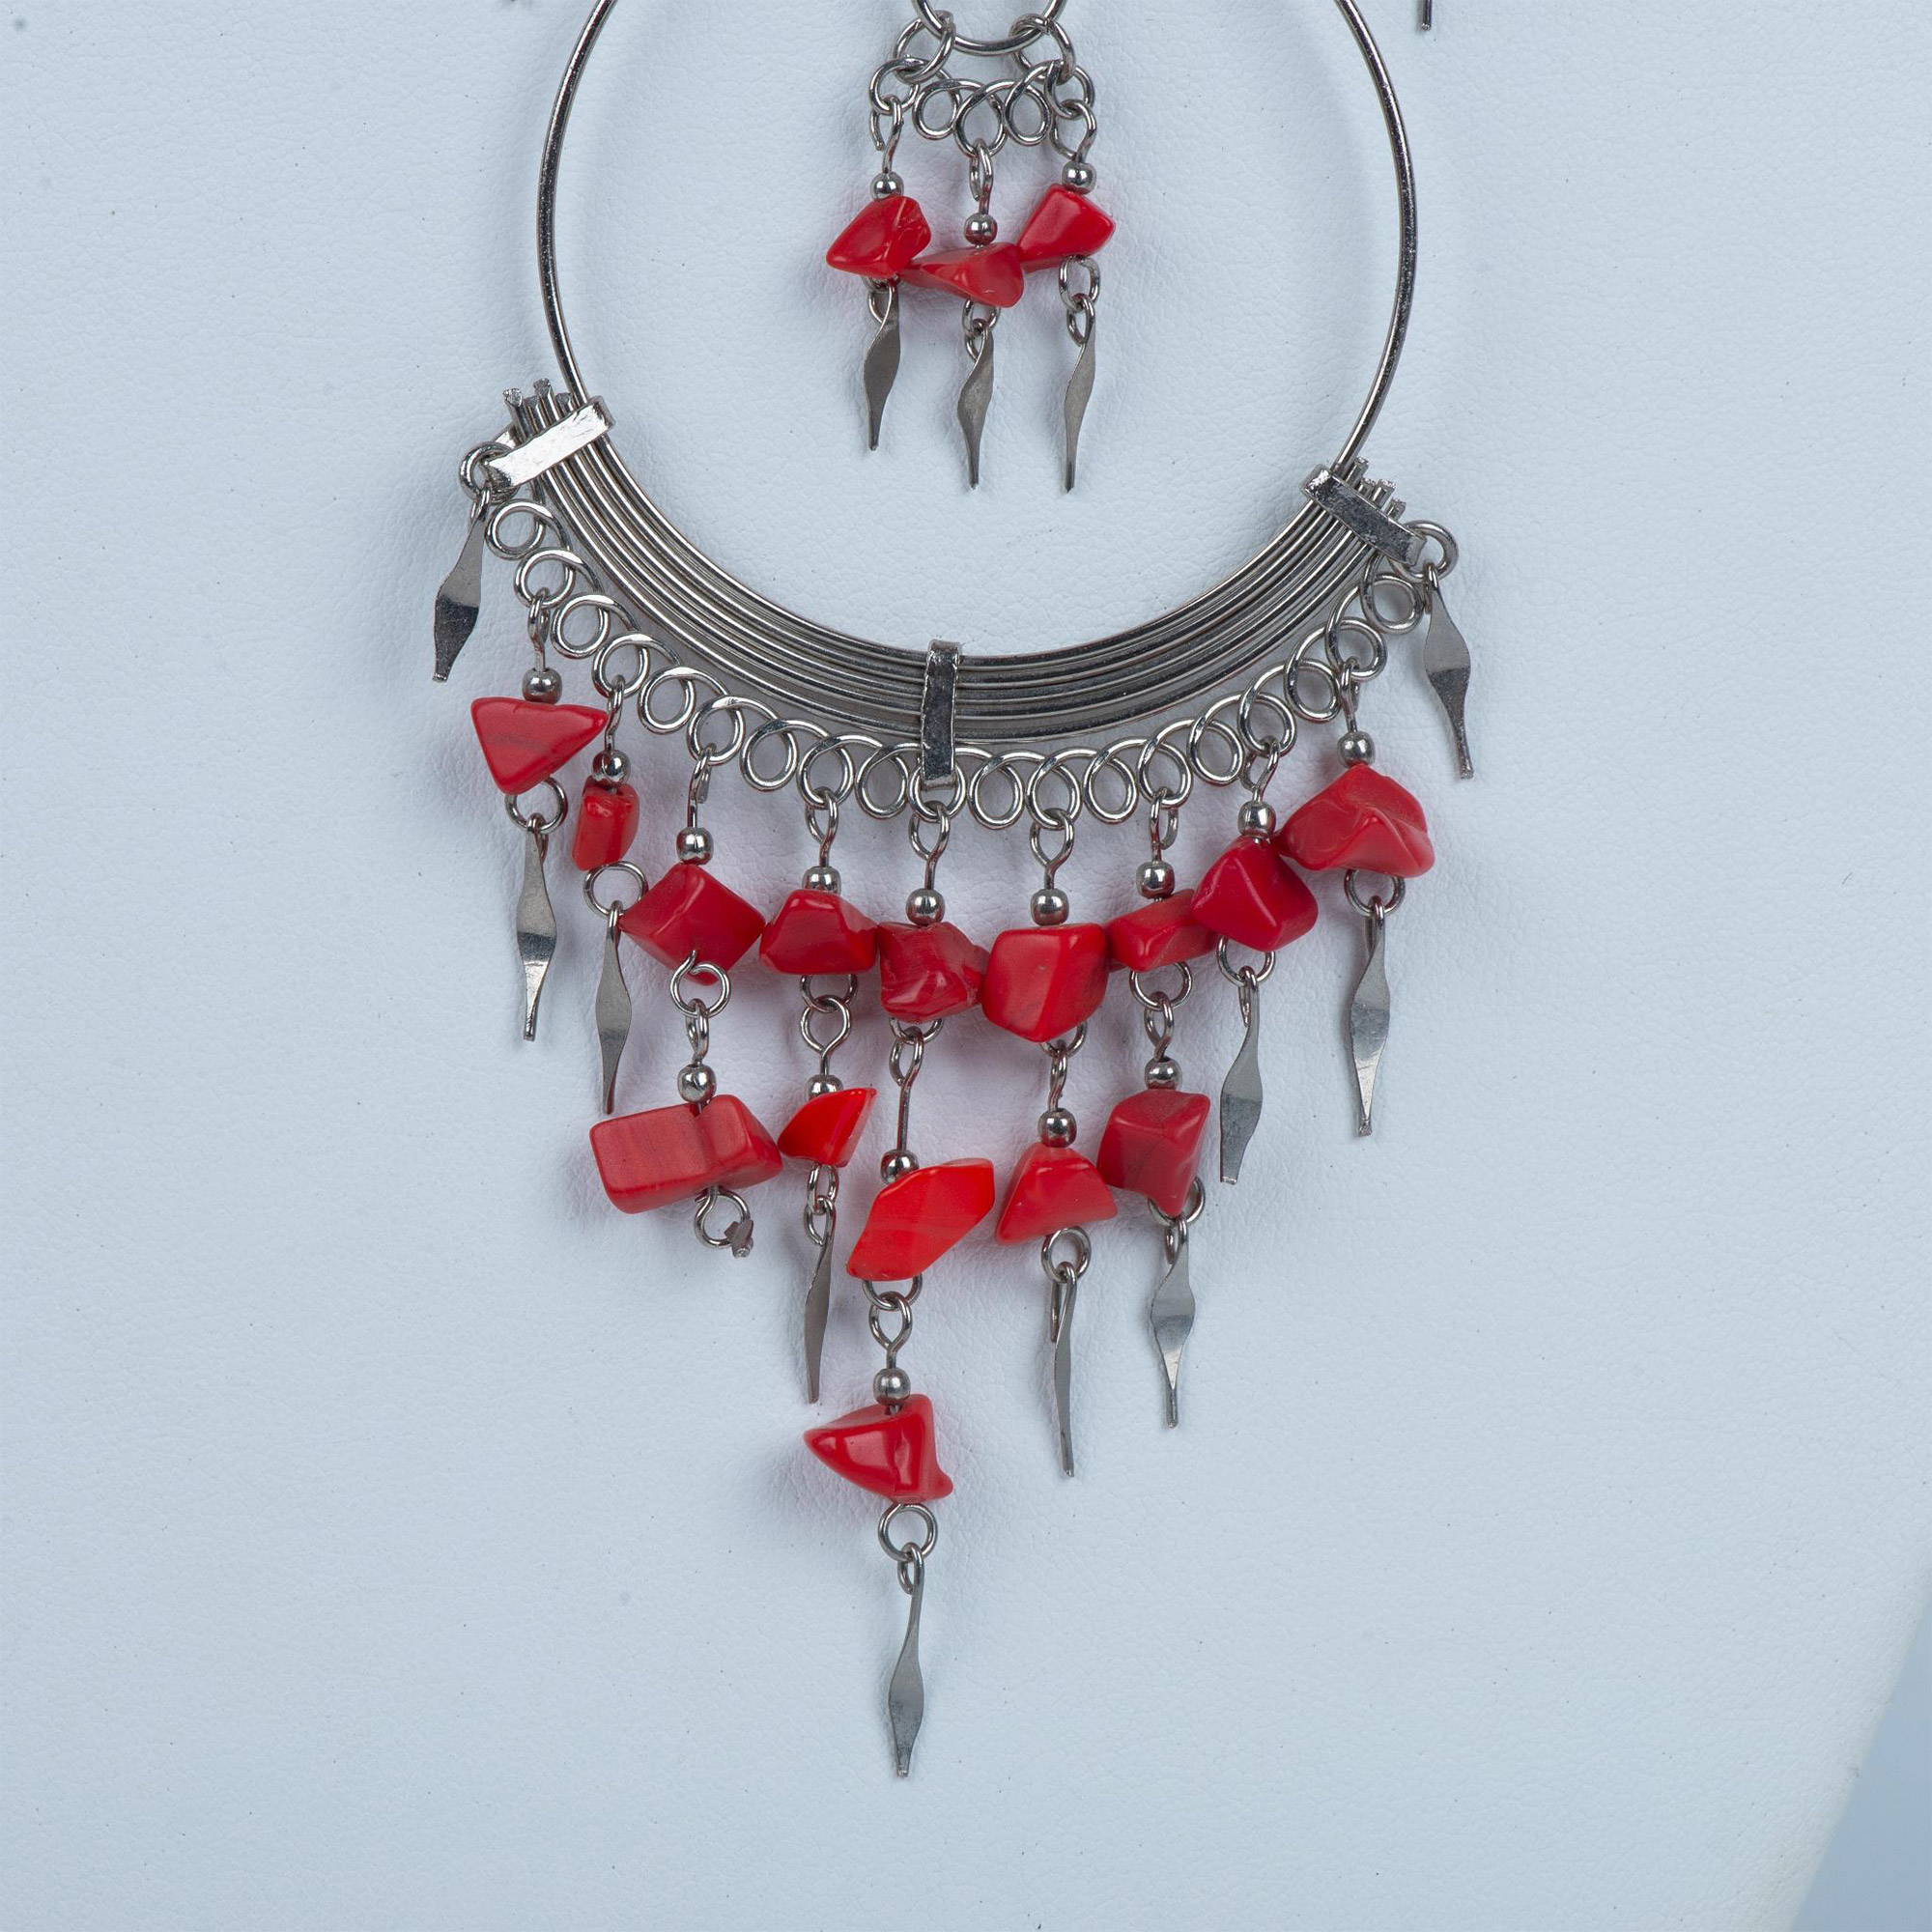 Bohemian Silver Metal Wire & Coral Bead Necklace - Image 2 of 4